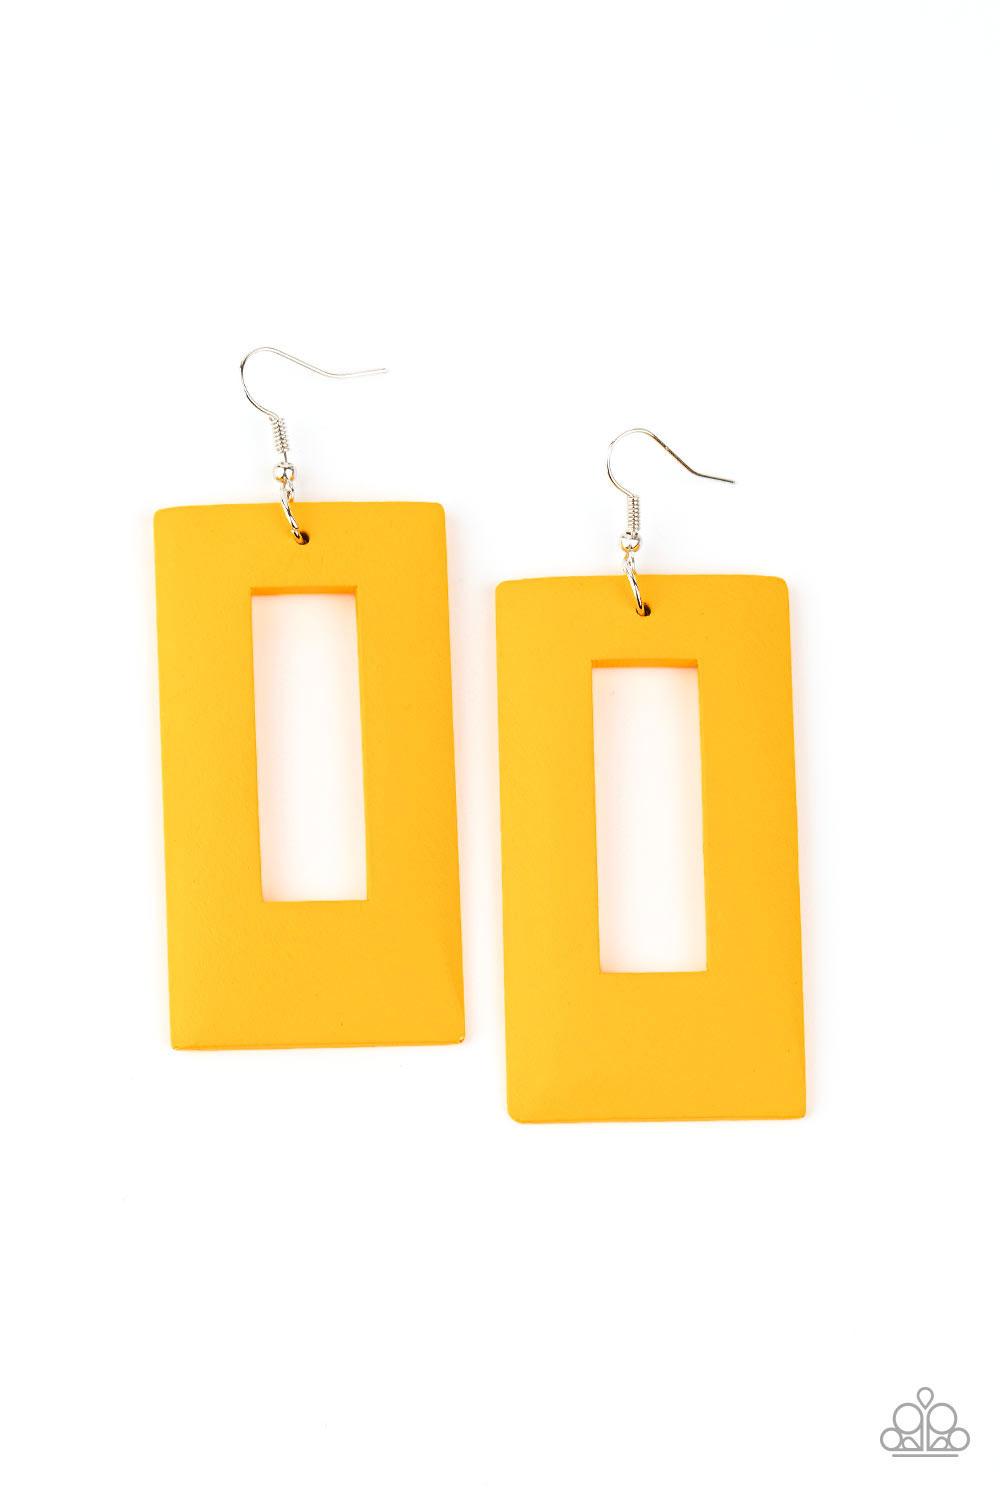 Paparazzi Accessories Totally Framed - Yellow Brushed in a sunny yellow finish, a thick rectangular wooden frame swings from the ear for a retro look. Earring attaches to a standard fishhook fitting. Sold as one pair of earrings. Jewelry